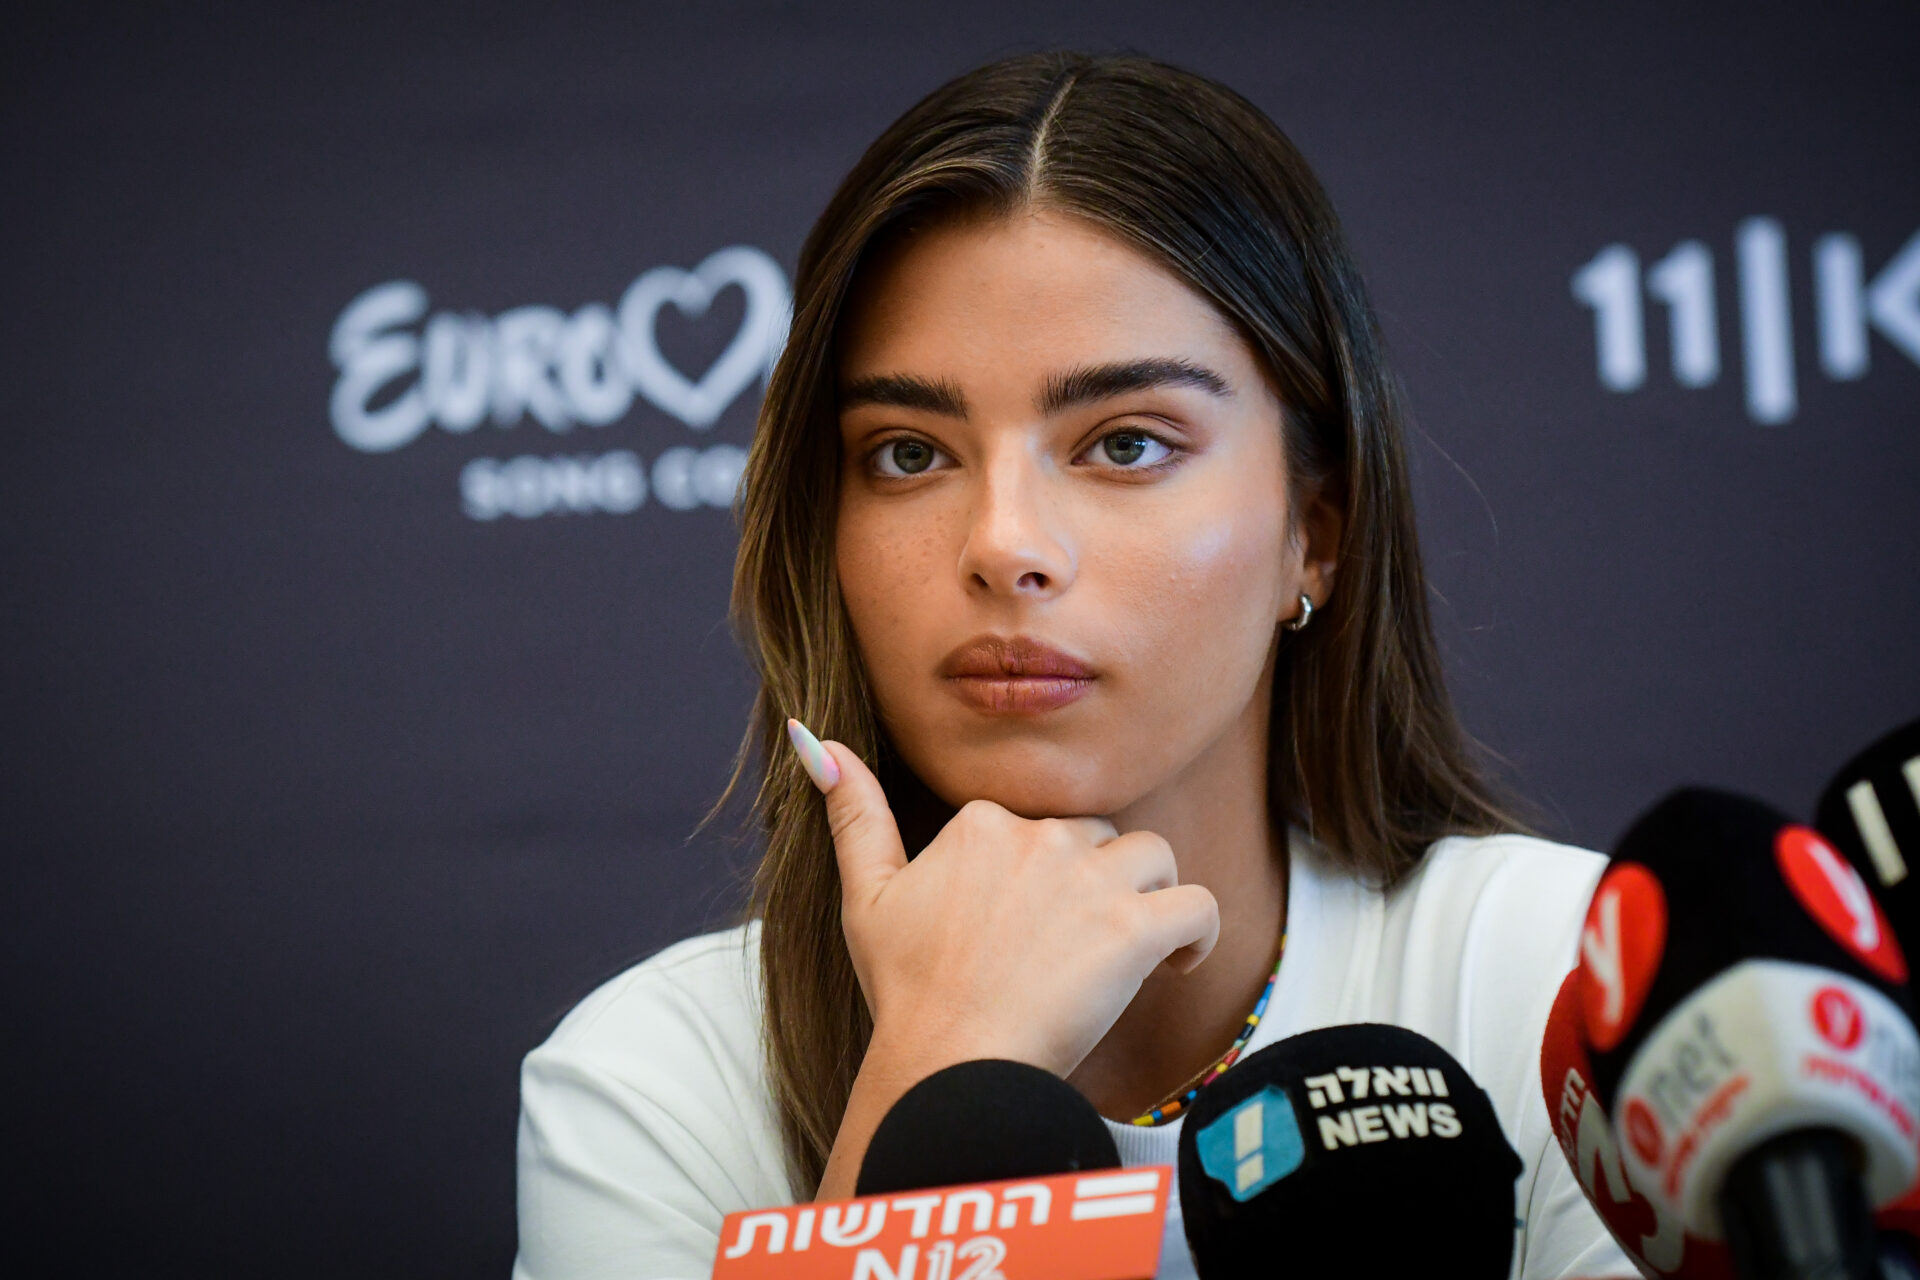 Noa Kirel announces that she will represent Israel in the 2023 Eurovision Song Contest at a press conference on August 10, 2022. Photo by Avshalom Sassoni/Flash90